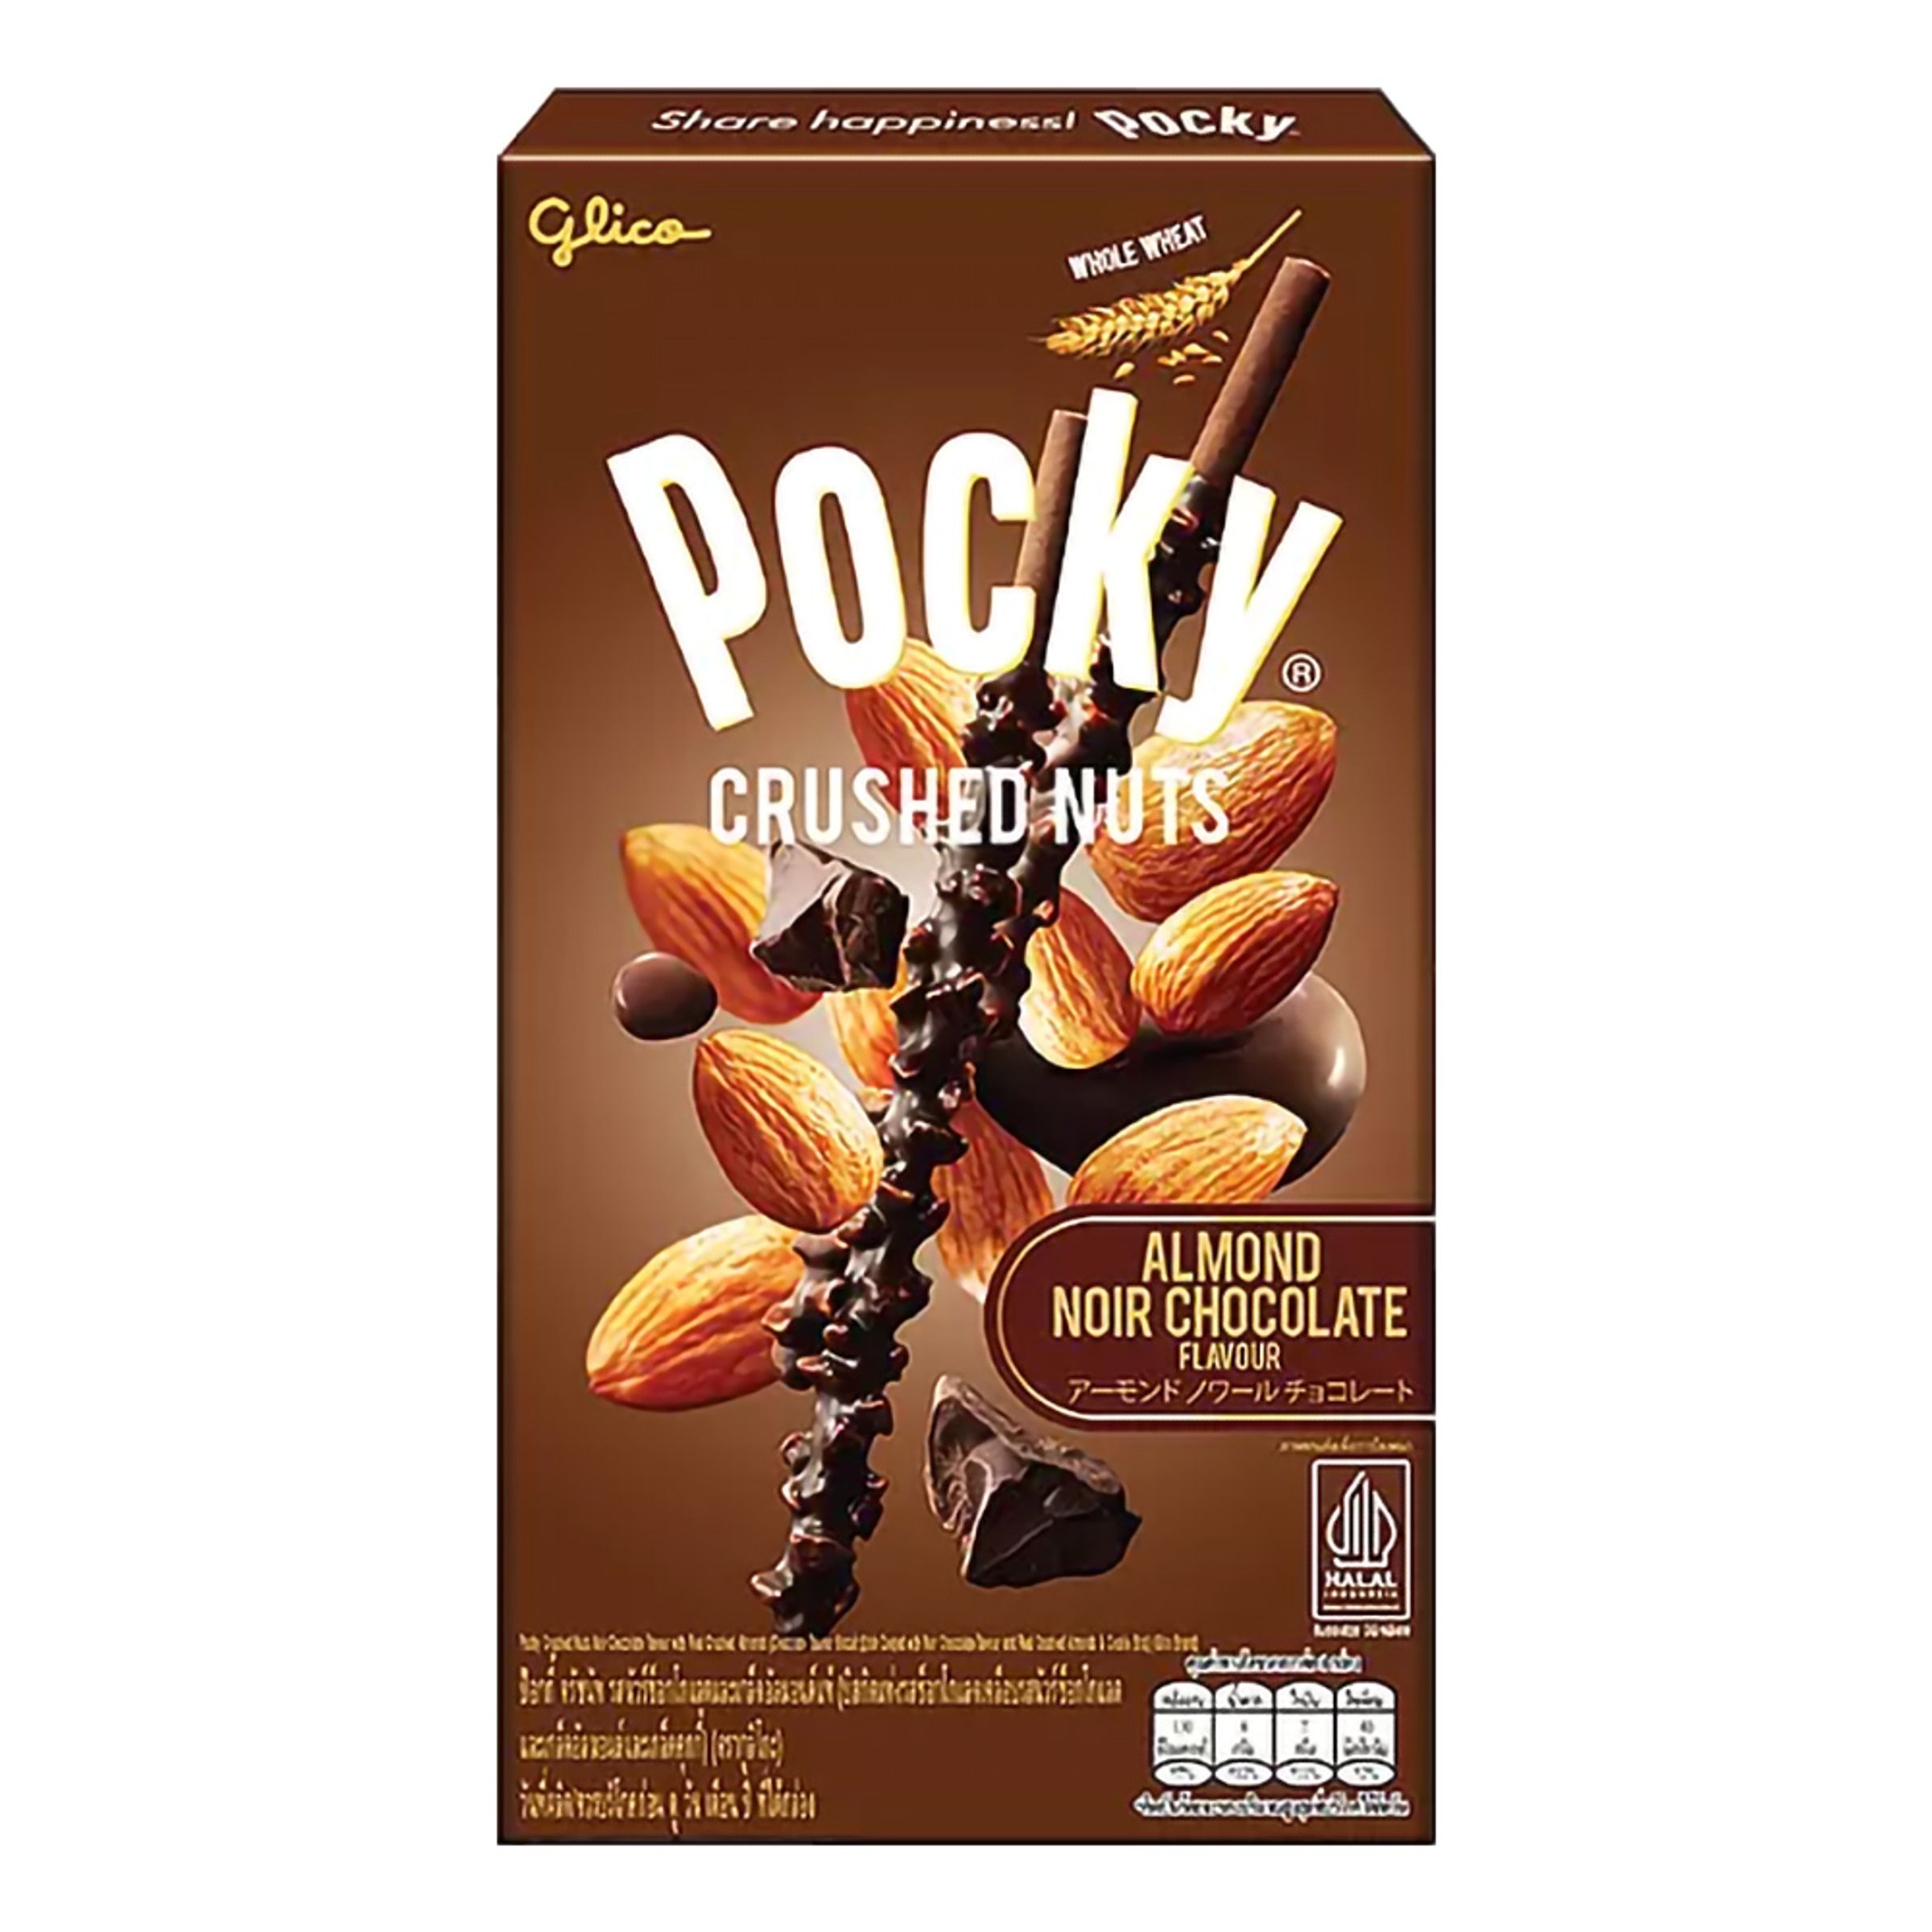 Pocky Crushed Nuts Almond Chocolate - 25 gram